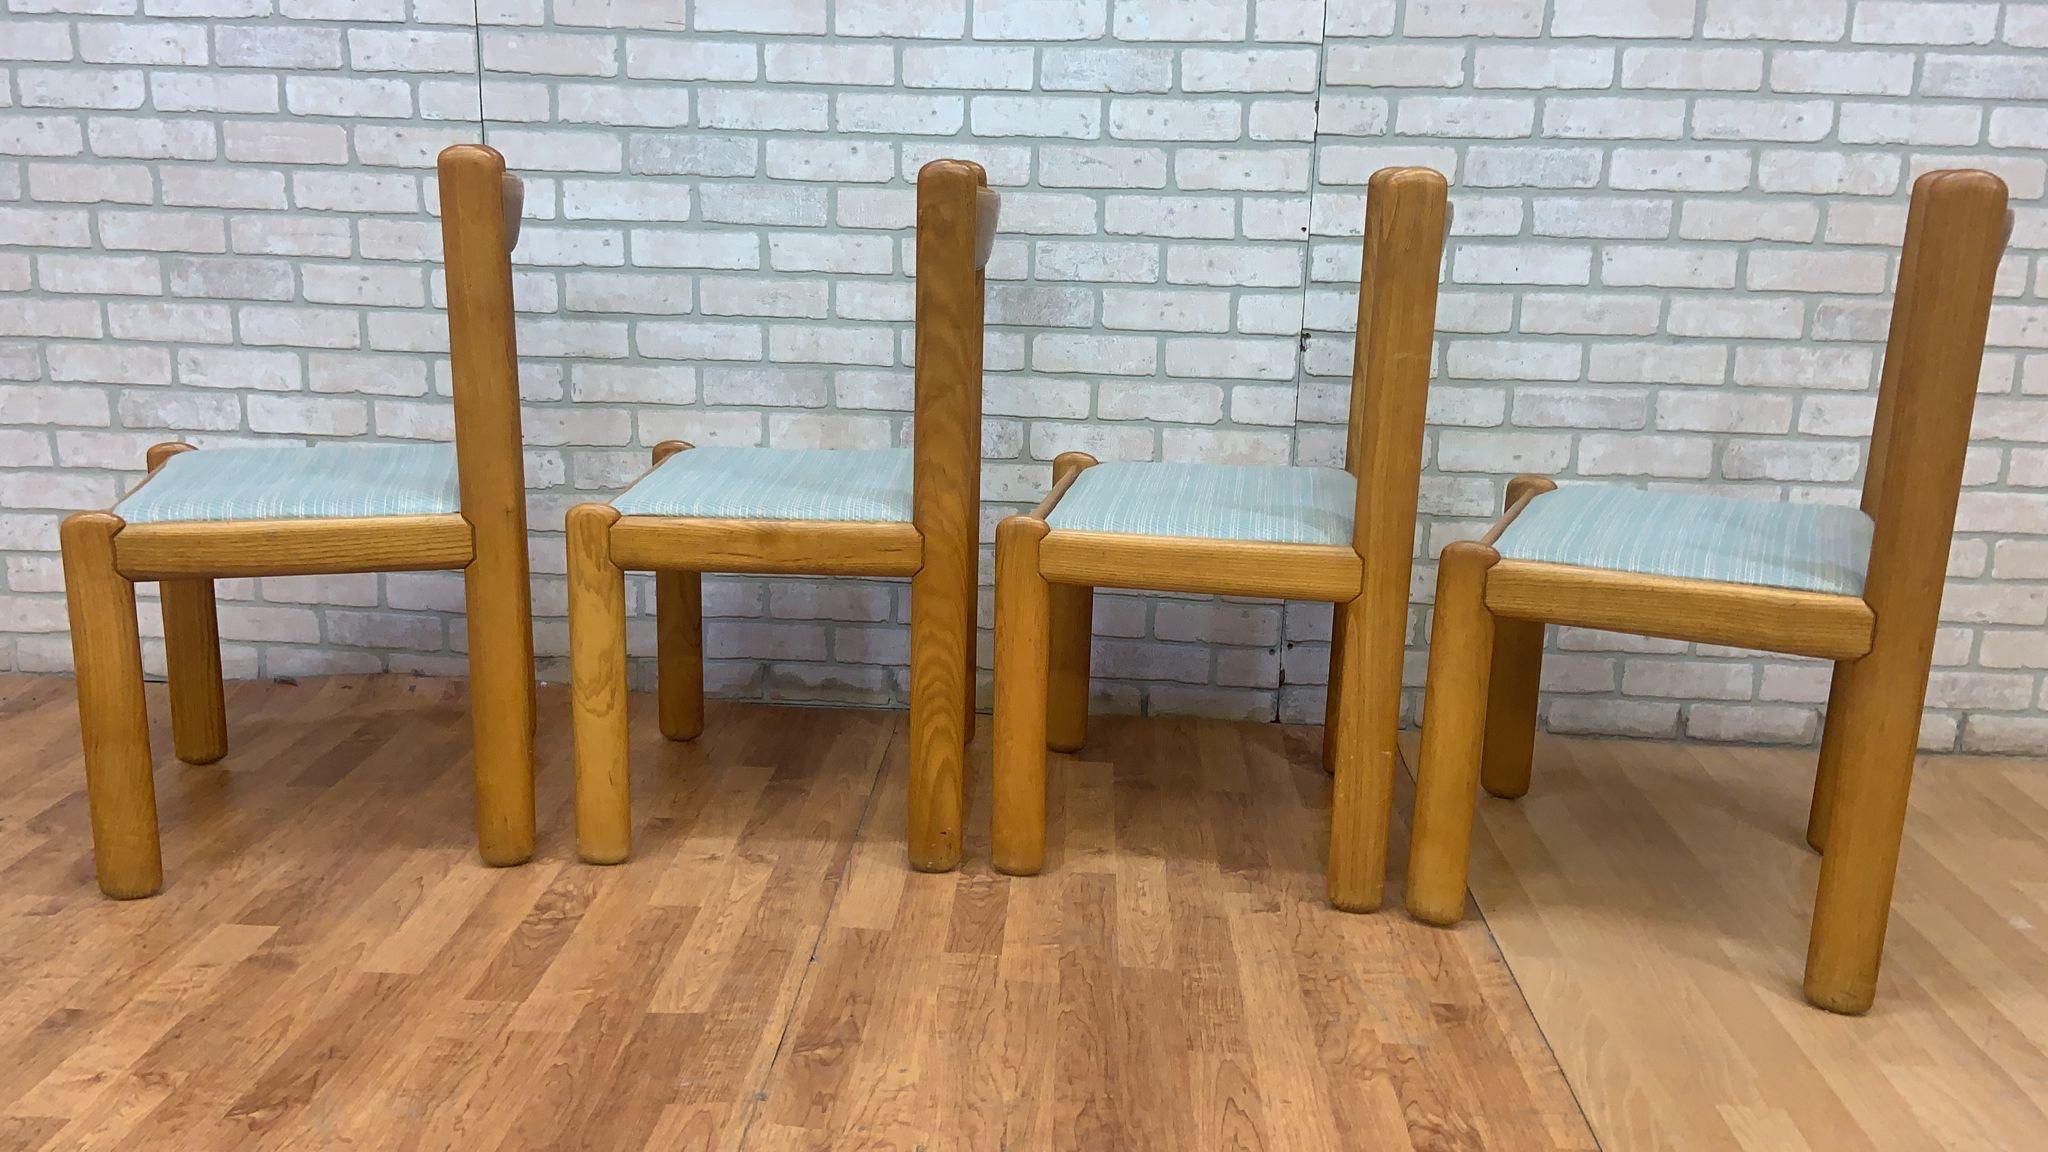 Vintage Italian Modern Vico Magistretti Style Blonde Beech Wood Chairs -Set of 4 For Sale 1